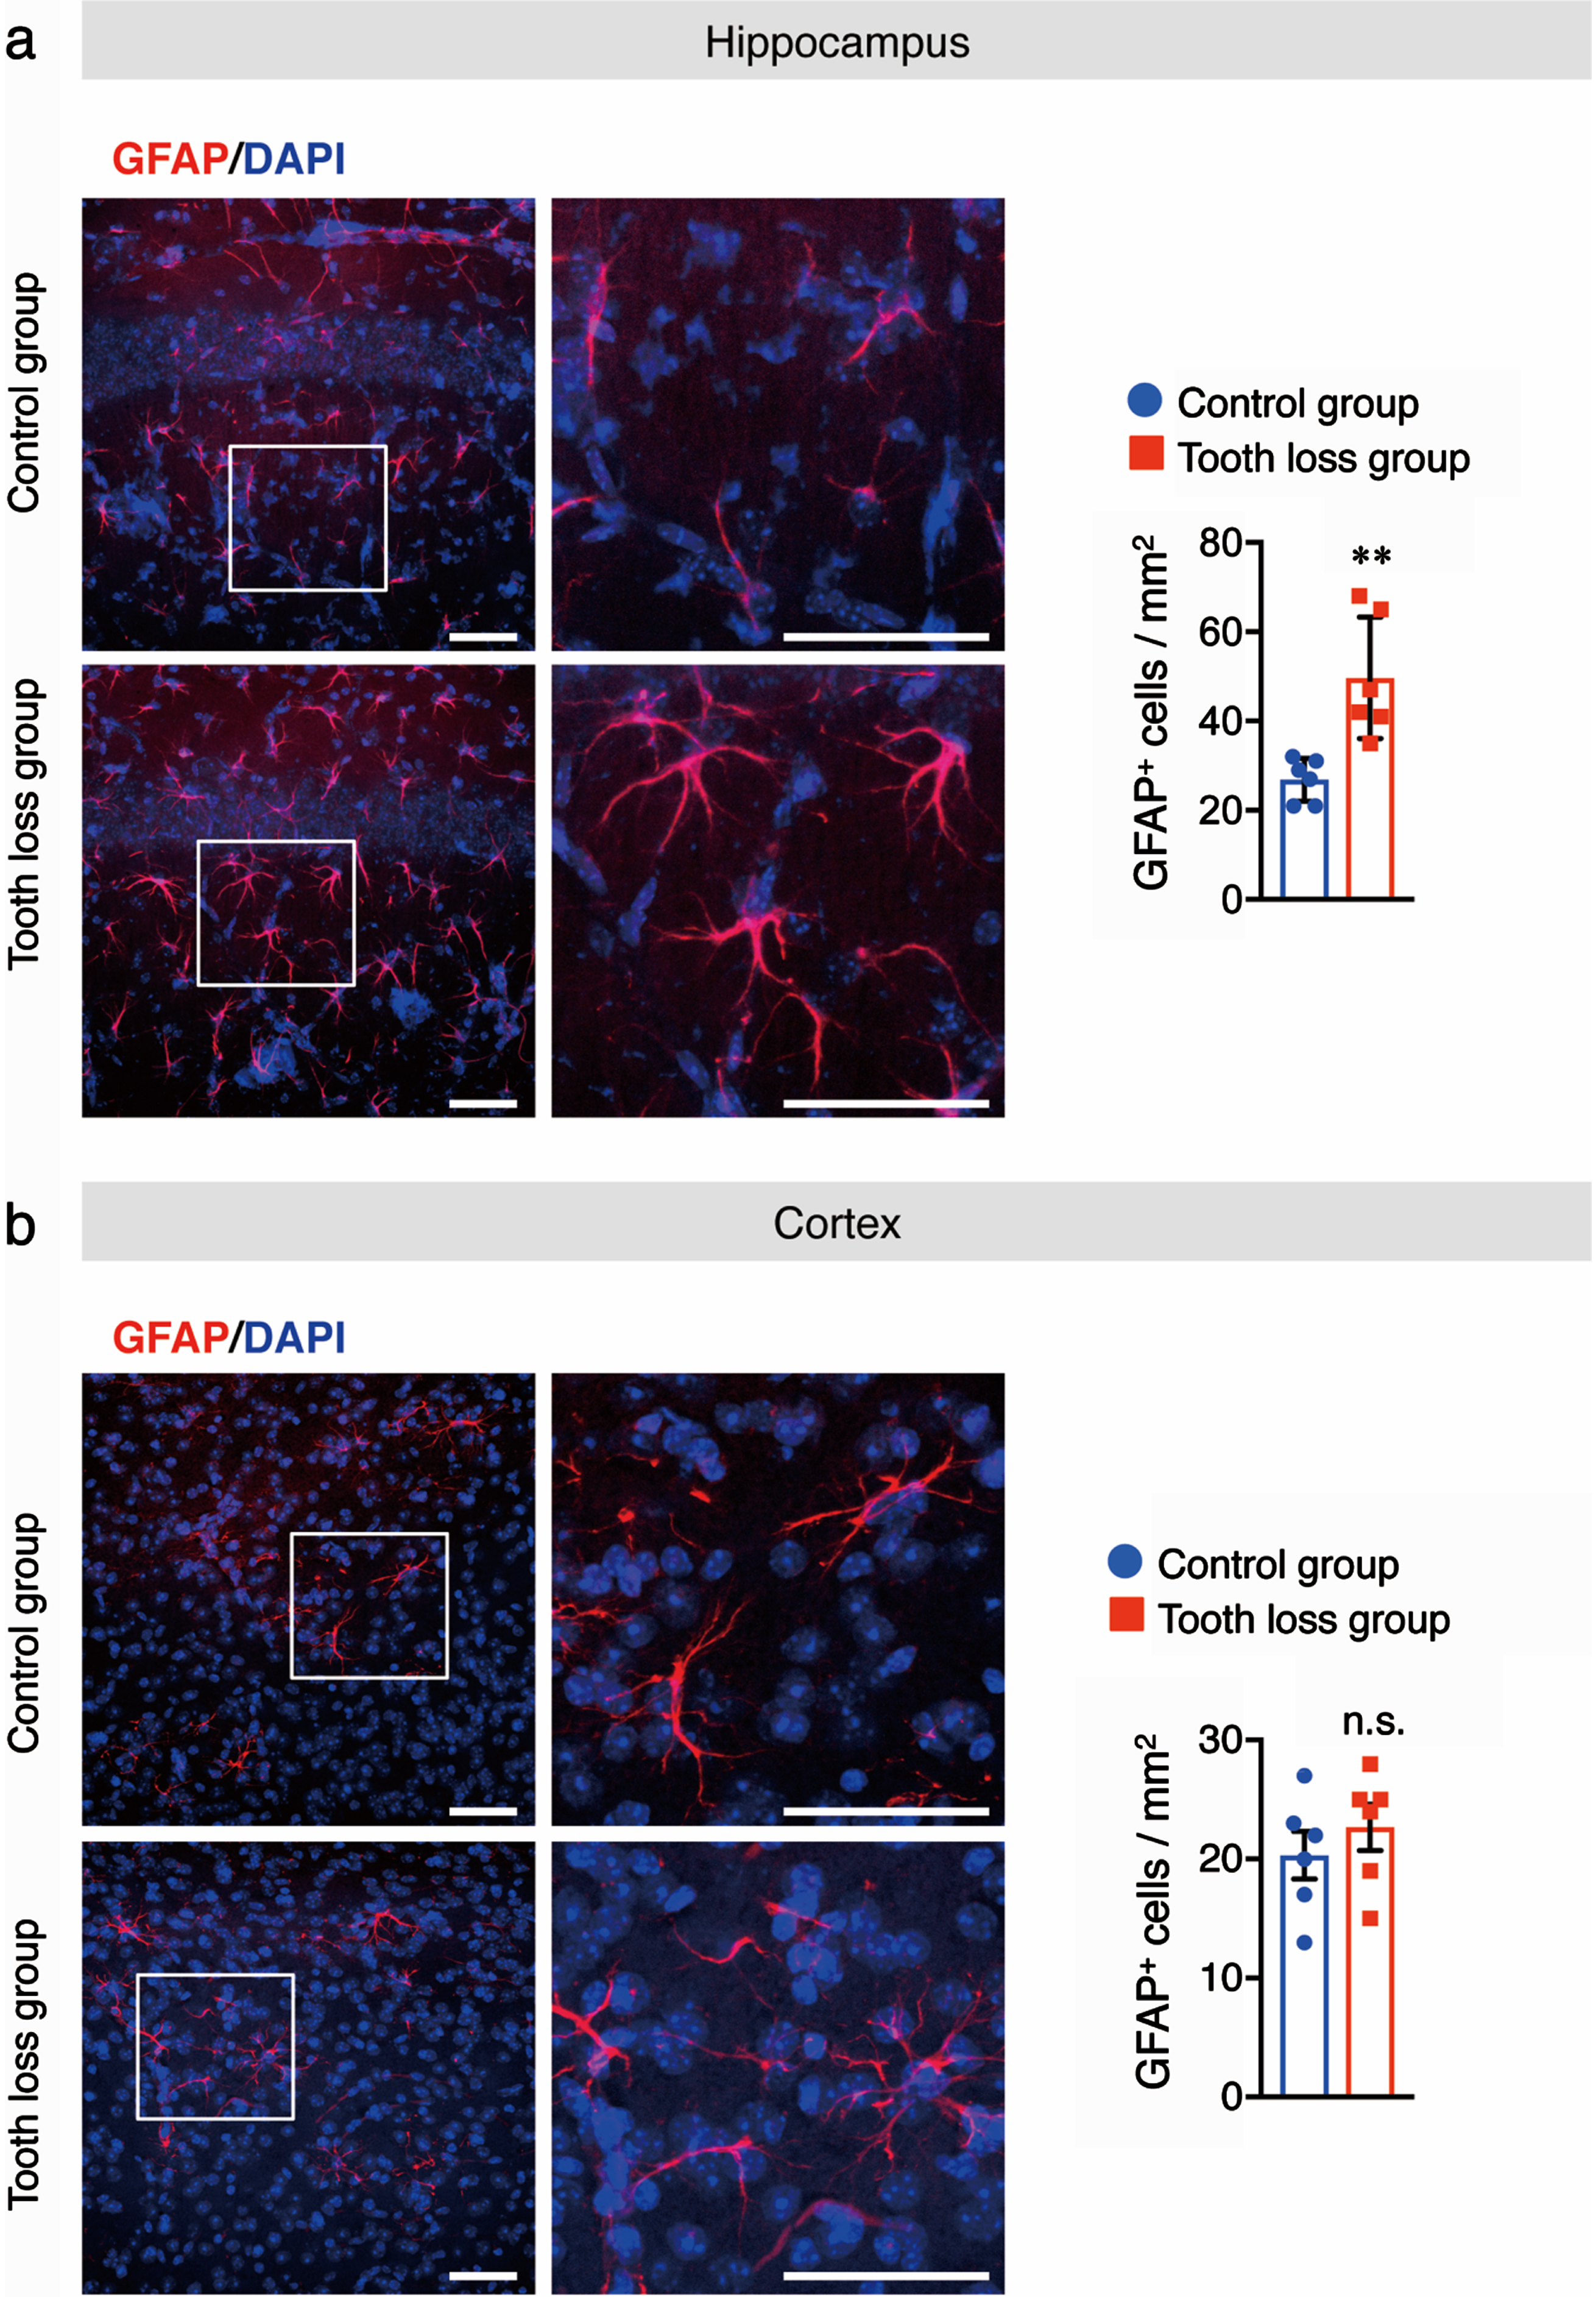 Tooth loss enhances astrocyte activation in the hippocampus. Sagittal brain sections of mice were immunostained with the anti-GFAP antibody (red) and cell nuclei were stained with DAPI (blue). Representative images of GFAP+ cells in the hippocampus (a) and cortex (b) are shown. Numbers of GFAP+ cells in the hippocampus (a, right panel) and cortex (b, right panel) are presented. Boxed regions in the left panel images are magnified in the right panels. Data are represented as the mean±SD. n = 6 per group. n.s., no significant difference; **p < 0.01 versus control group, as determined using Student’s t-test. Scale bars: 100μm.